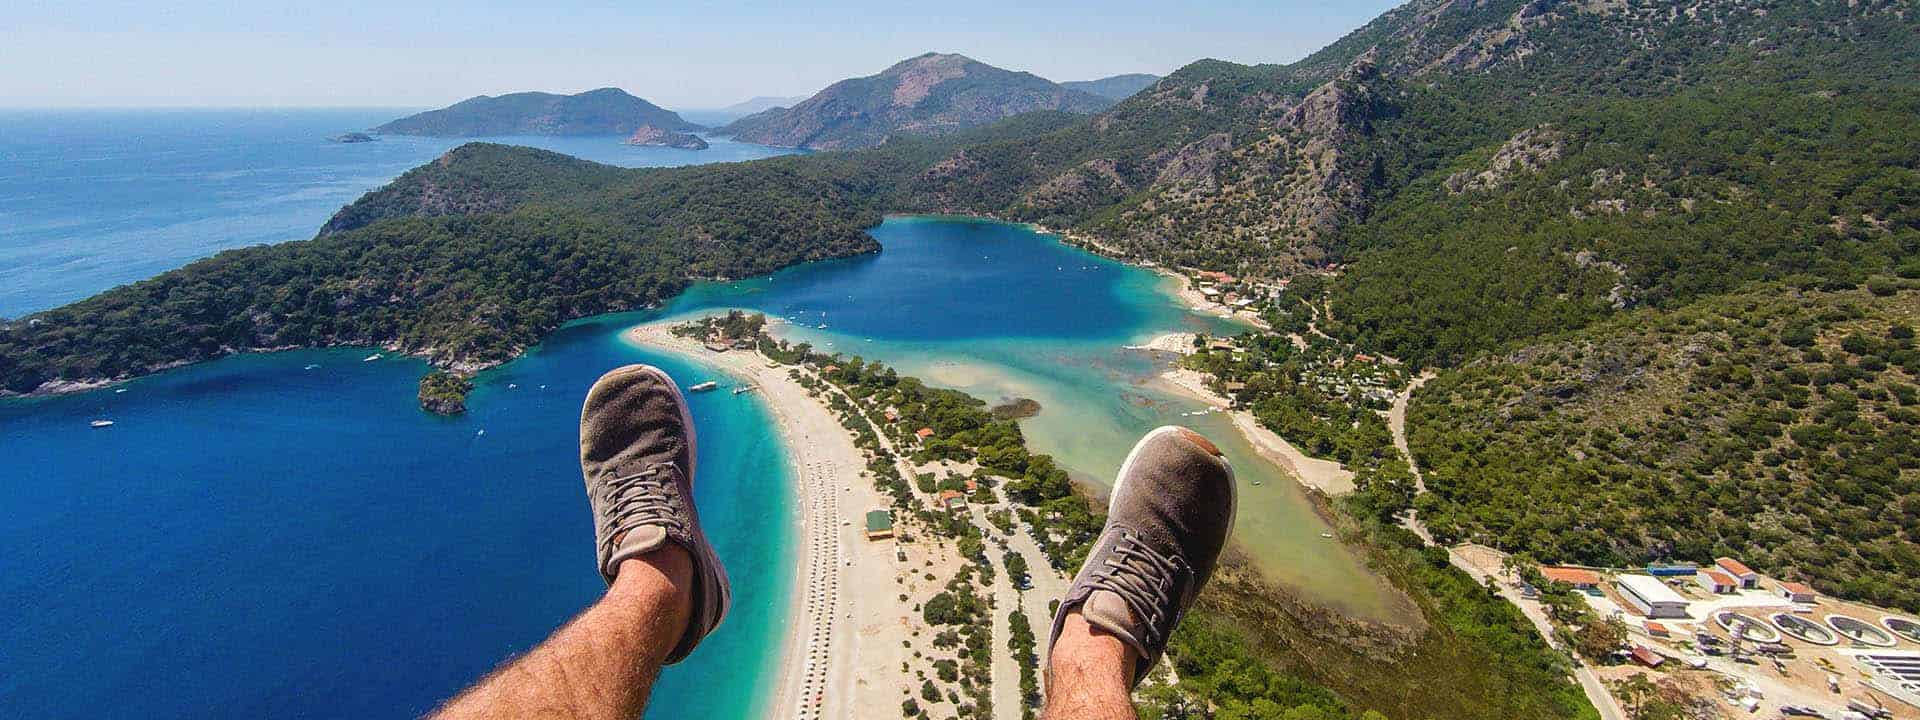 10 things you must do in Dalaman Turkey - Intrepid Escape